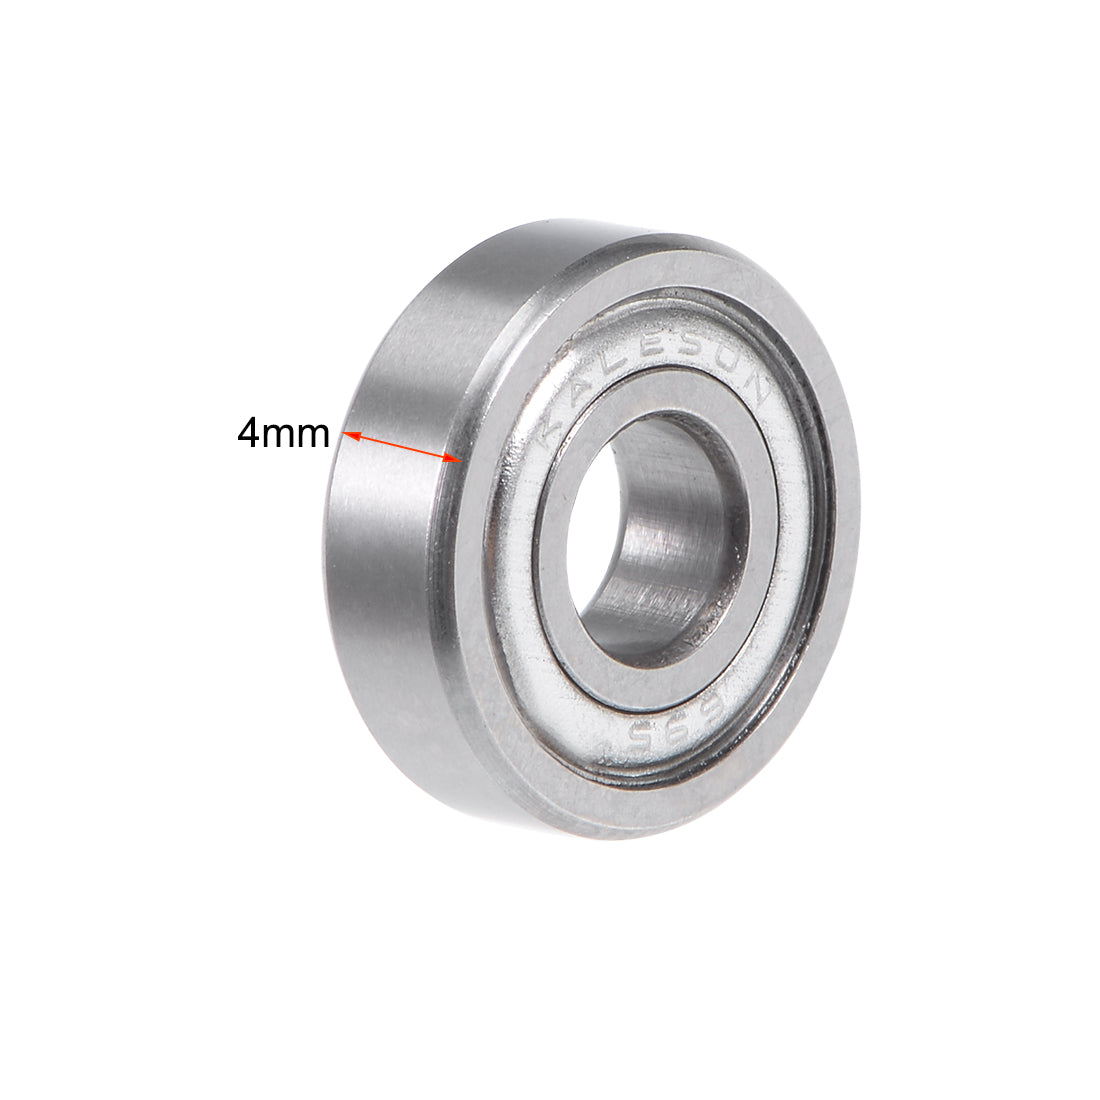 uxcell Uxcell Deep Groove Ball Bearings Metric Double Shielded Chrome Steel P0 Z1 Bearing